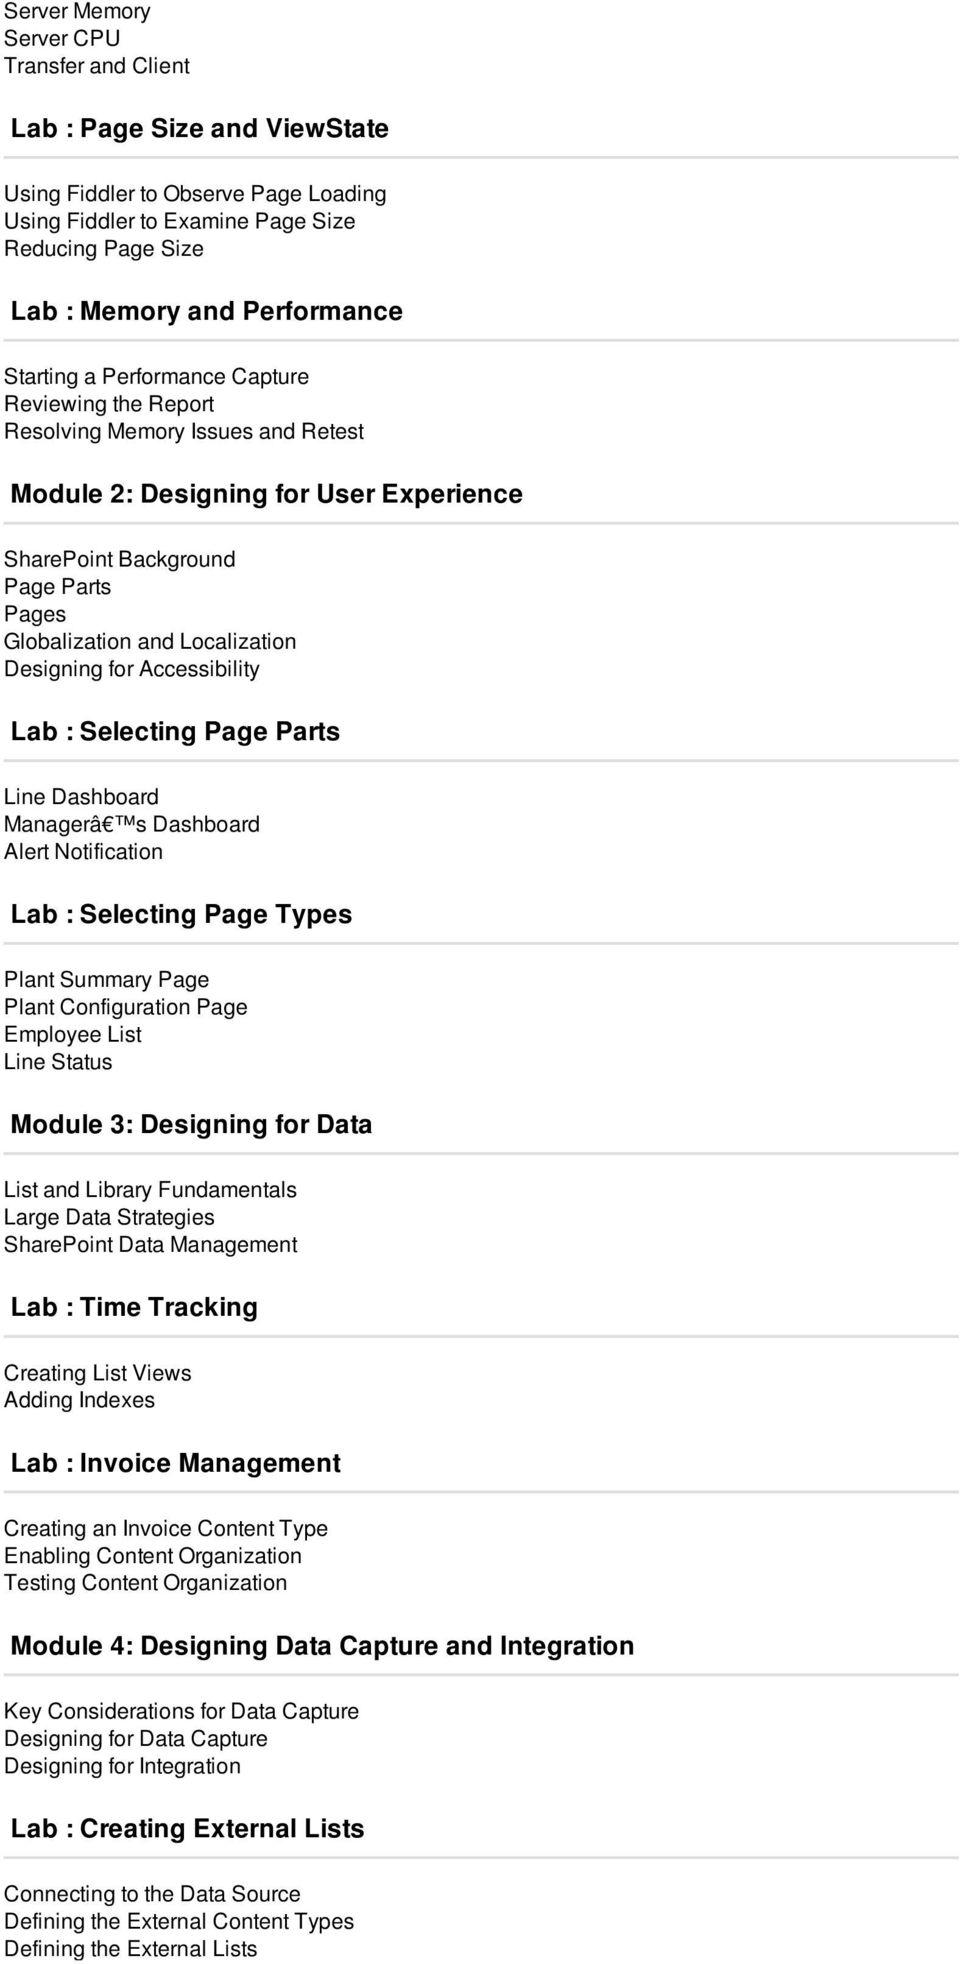 Designing for Accessibility Lab : Selecting Page Parts Line Dashboard Managerâ s Dashboard Alert Notification Lab : Selecting Page Types Plant Summary Page Plant Configuration Page Employee List Line